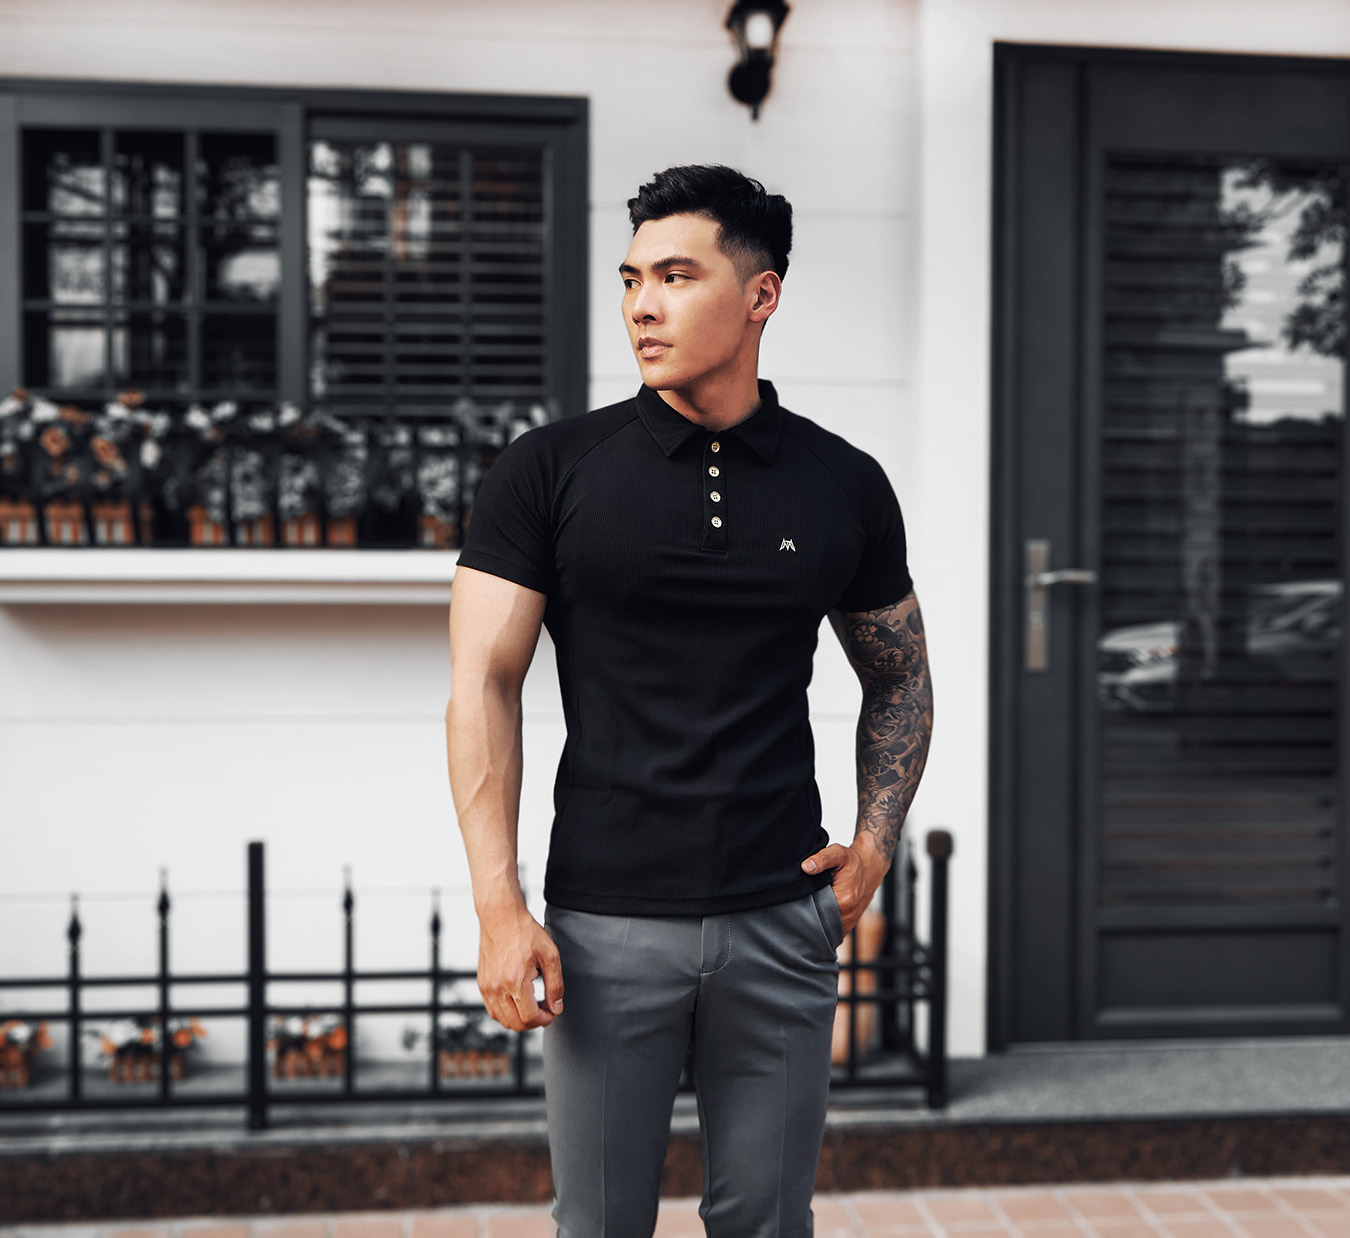 MUSCLE TAILOR | Muscle Fit Design For Men 健身時尚品牌 | SPRING COLLECTIONS